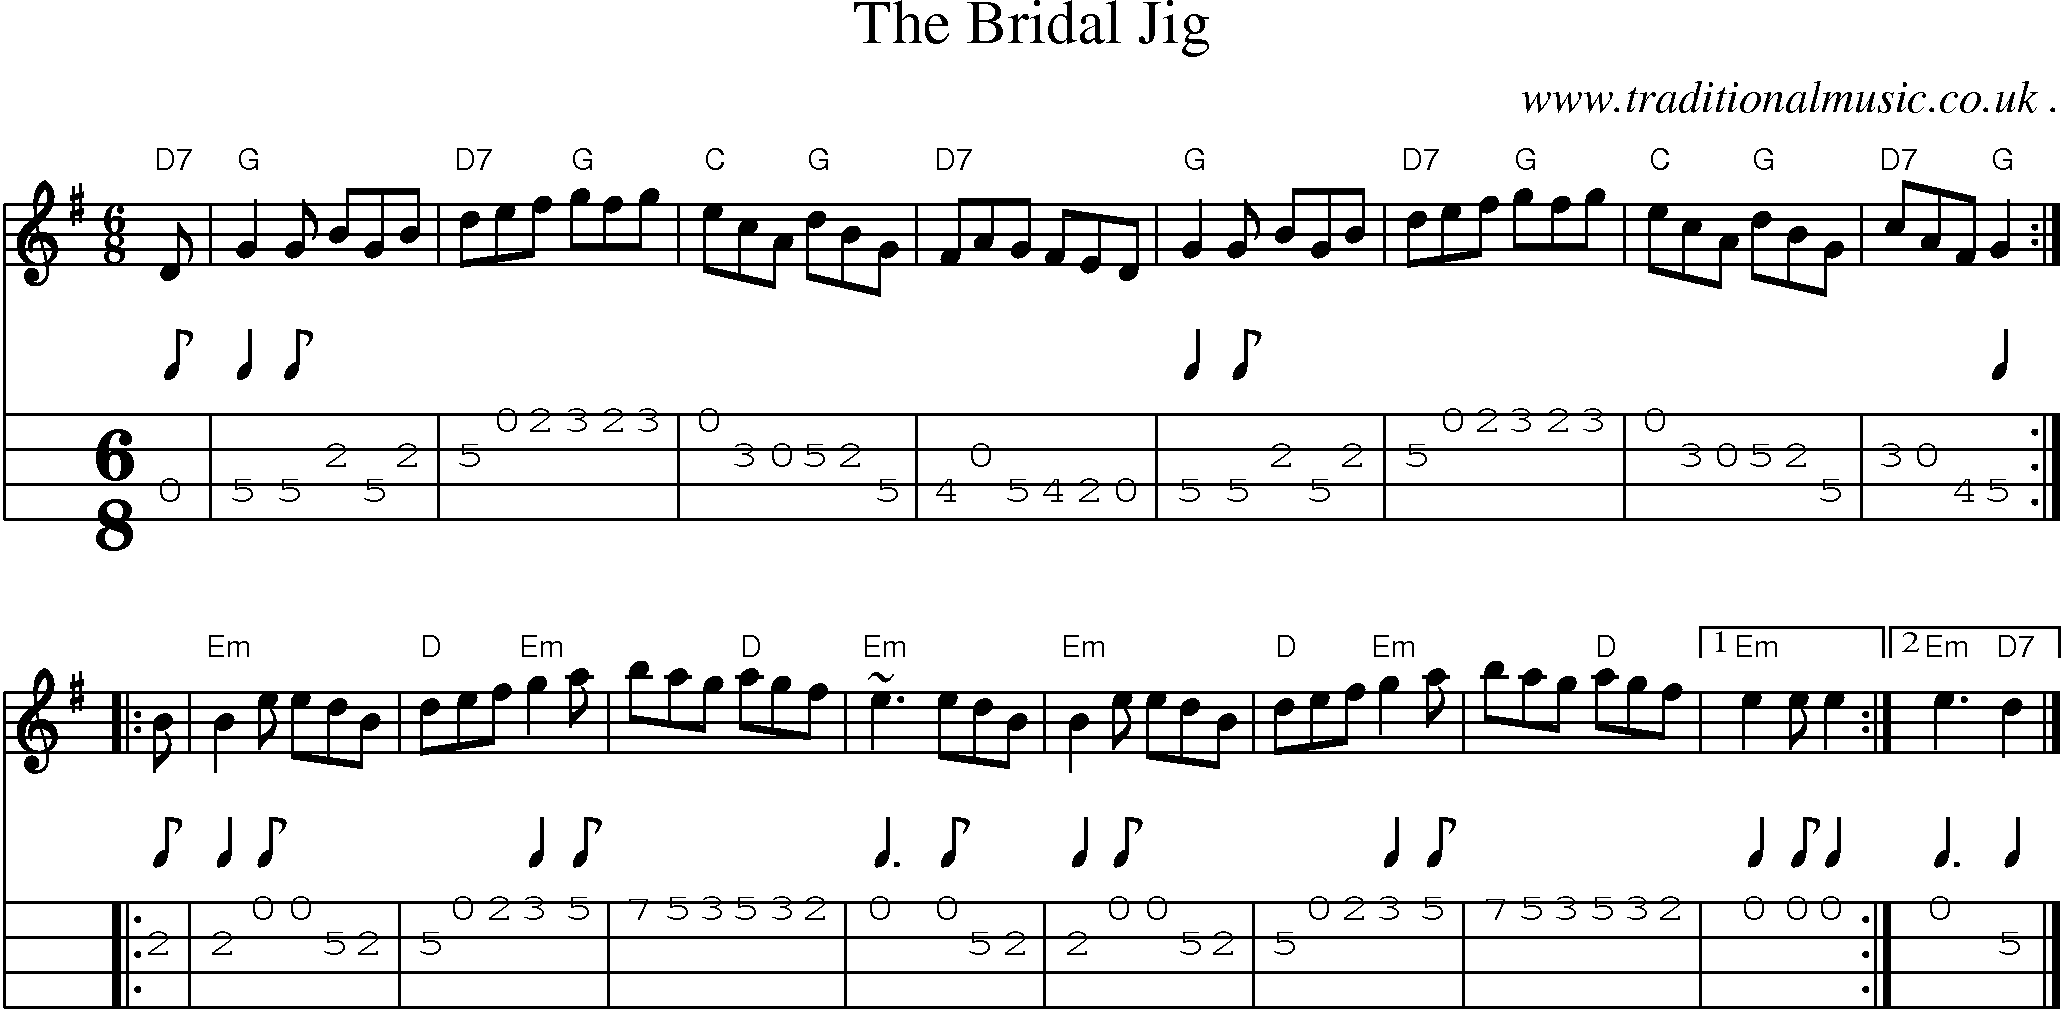 Sheet-music  score, Chords and Mandolin Tabs for The Bridal Jig